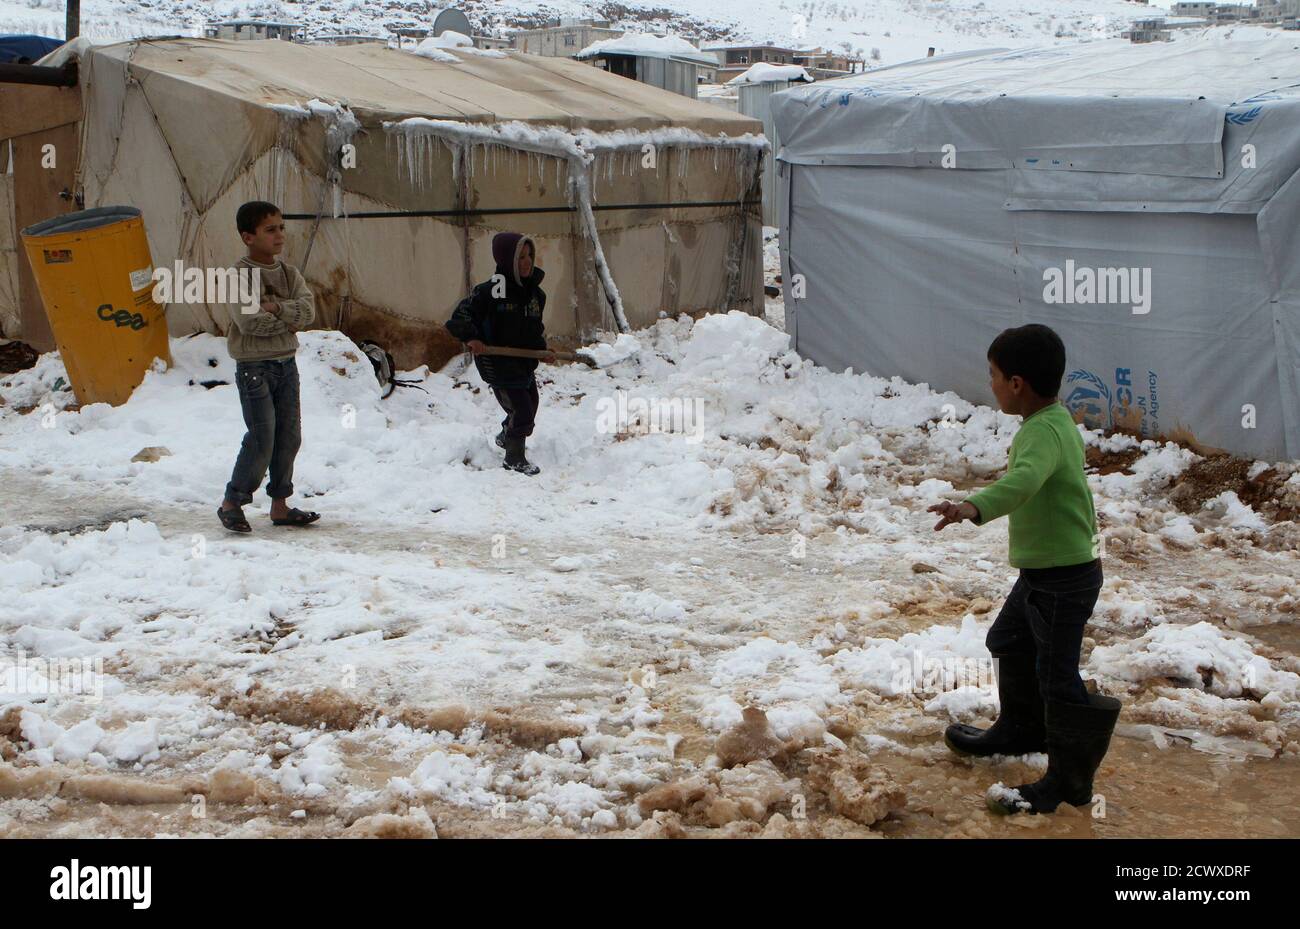 A Syrian refugee child shovels snow outside tent Aarsal town in Lebanon's eastern Bekaa December 13, 2013. A powerful winter storm sweeping the eastern Mediterranean this week causing mayhem